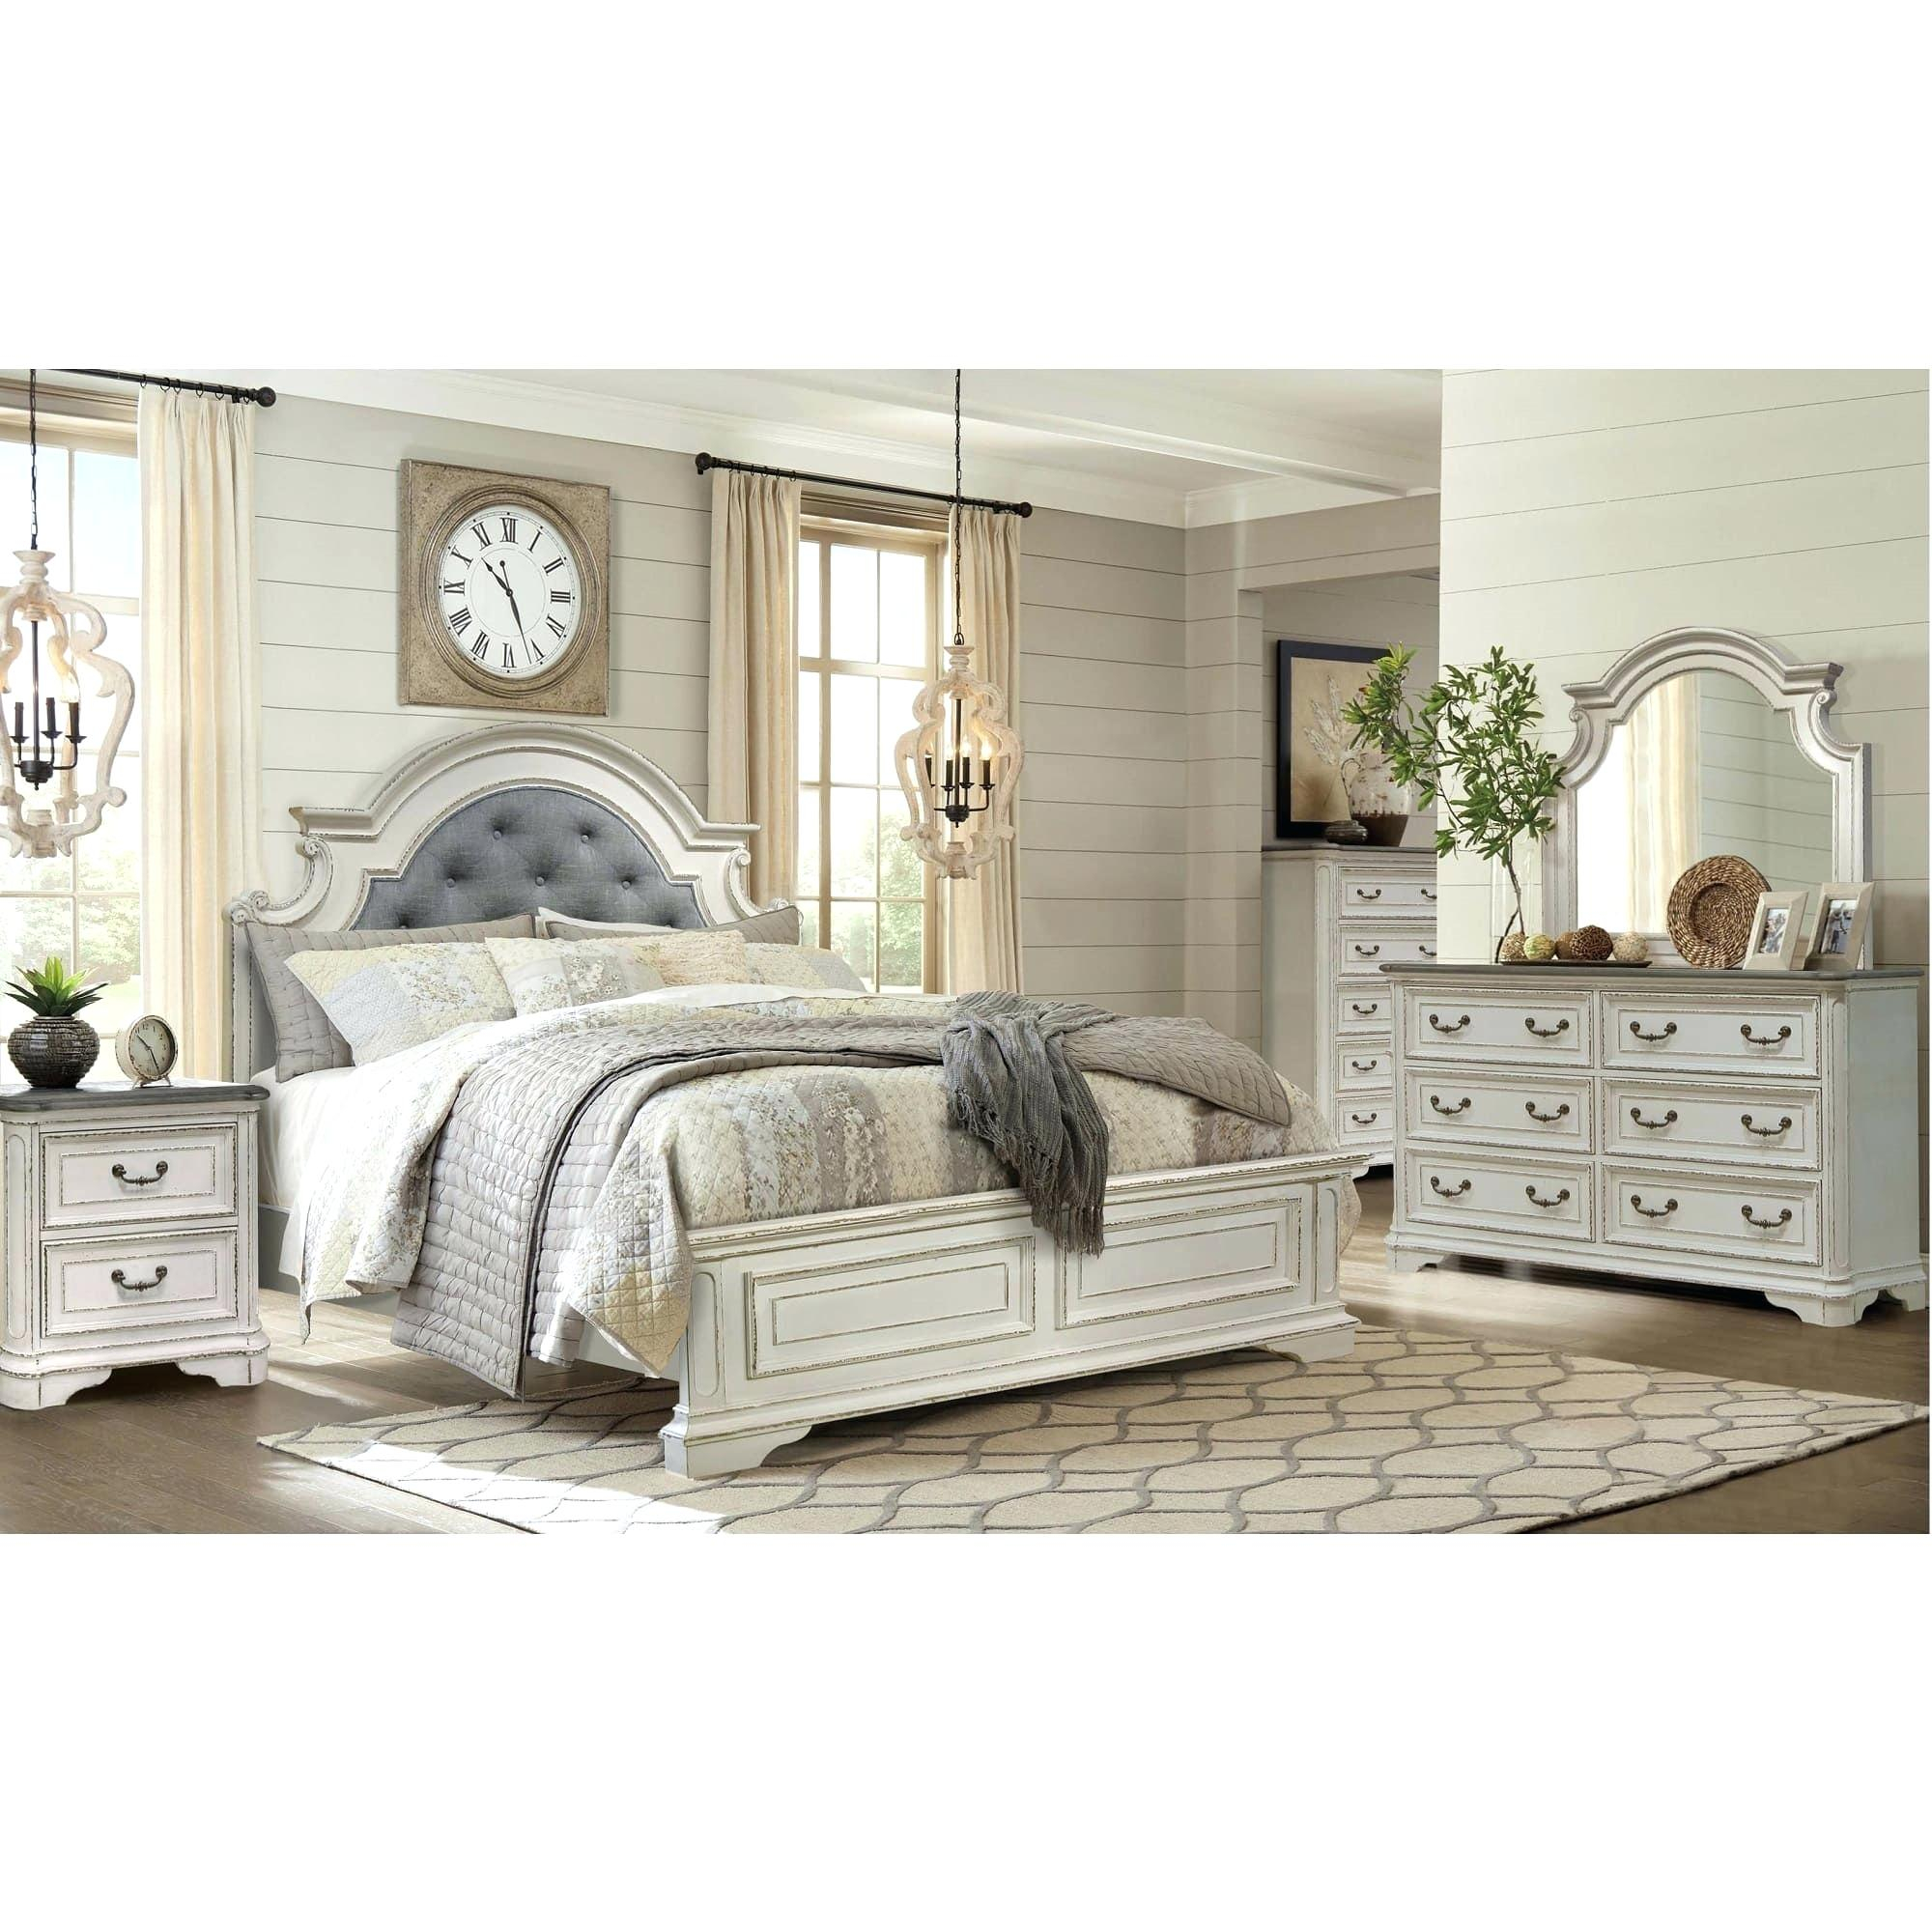 Bedroom Set With Diamonds Wtfptld in sizing 2000 X 2000